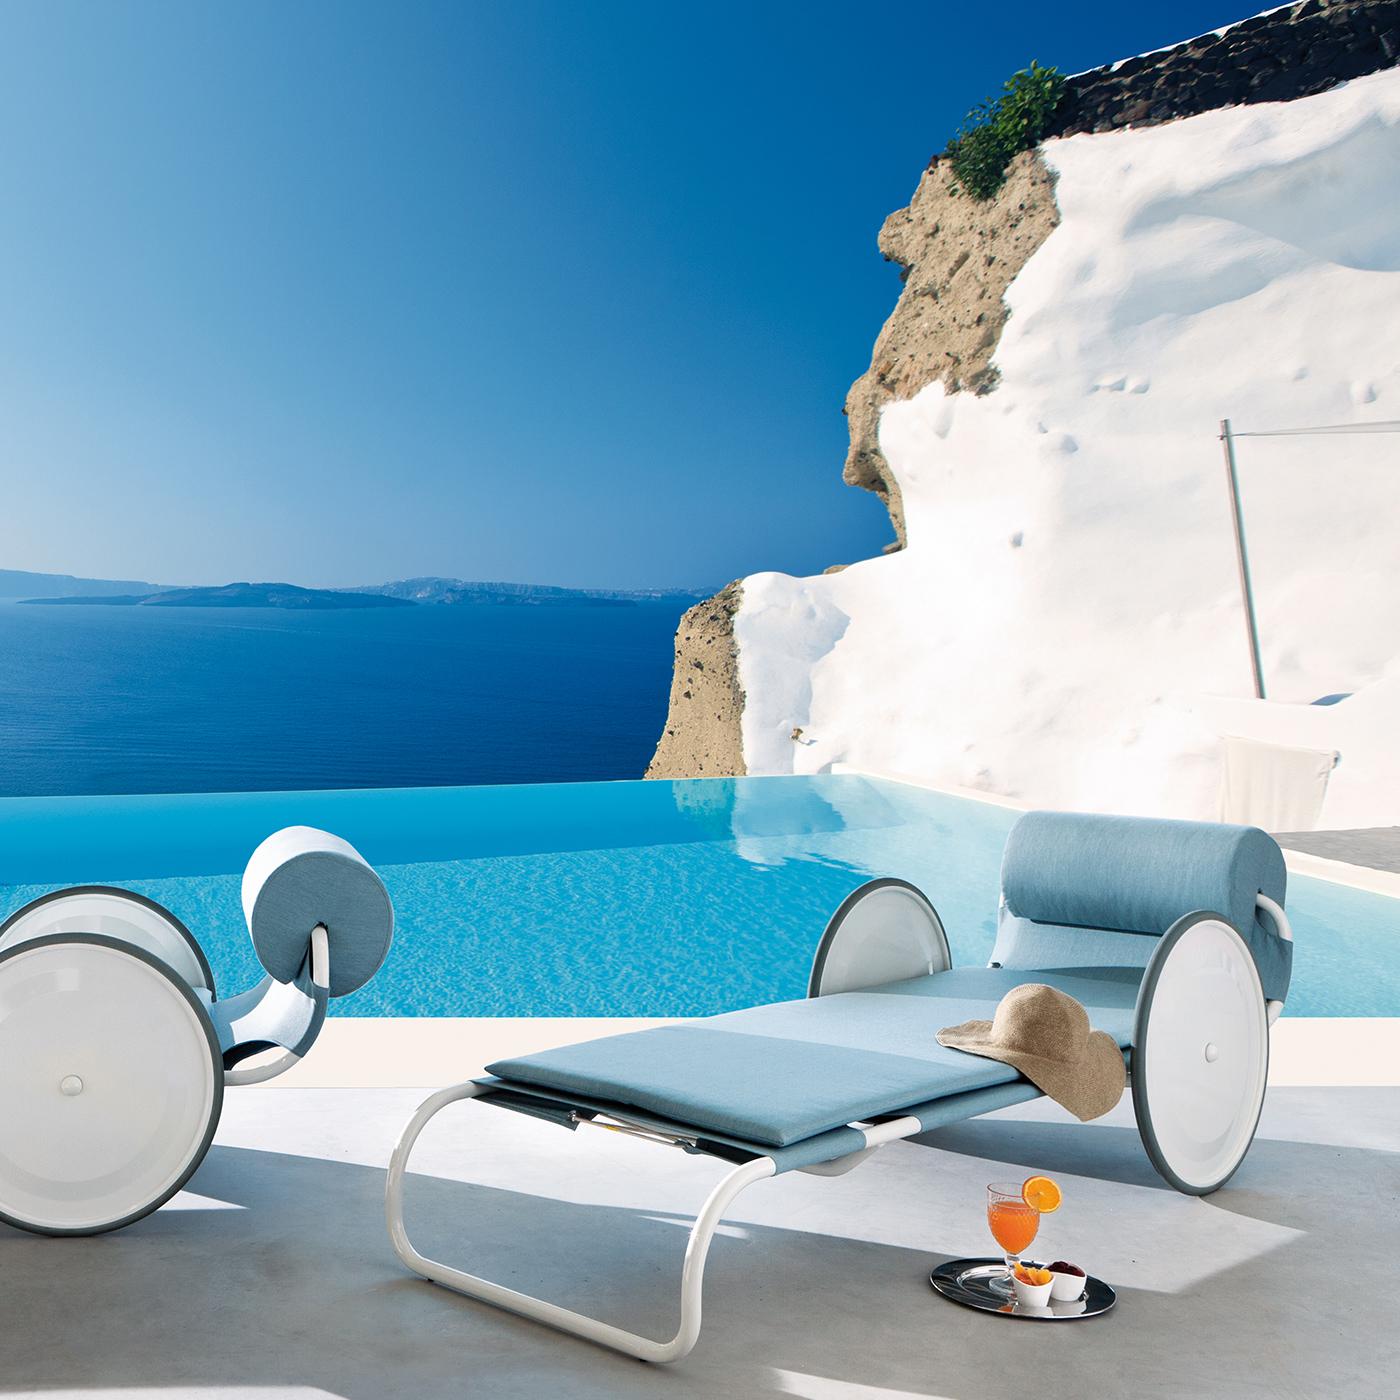 Defined by an unmistakable 1960s style and an architectural silhouette, this sun lounger is from the iconic Locus Solus Collection of outdoor furniture, designed by Gae Aulenti in 1964 and relaunched by Exteta in 2016. Stylish yet functional, sturdy